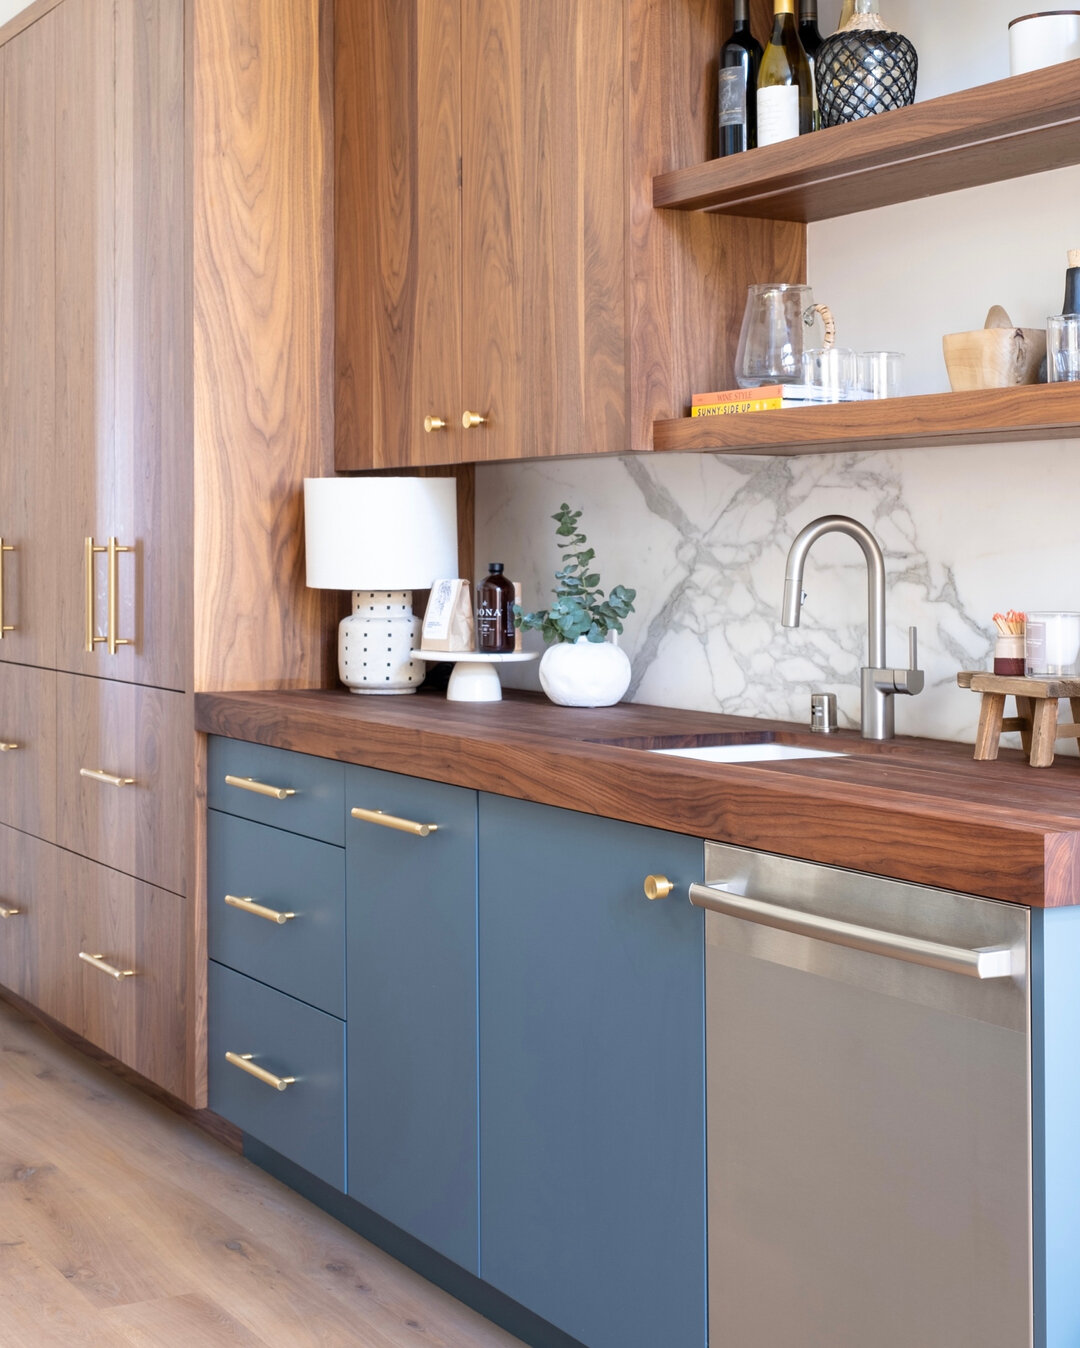 We&rsquo;re not afraid of mixed materials over here at GRD. This kitchen, primarily designed with walnut cabinetry, needed a pop of color and we came through with this cool blue creating the perfect spot for making cocktails and gathering with friend